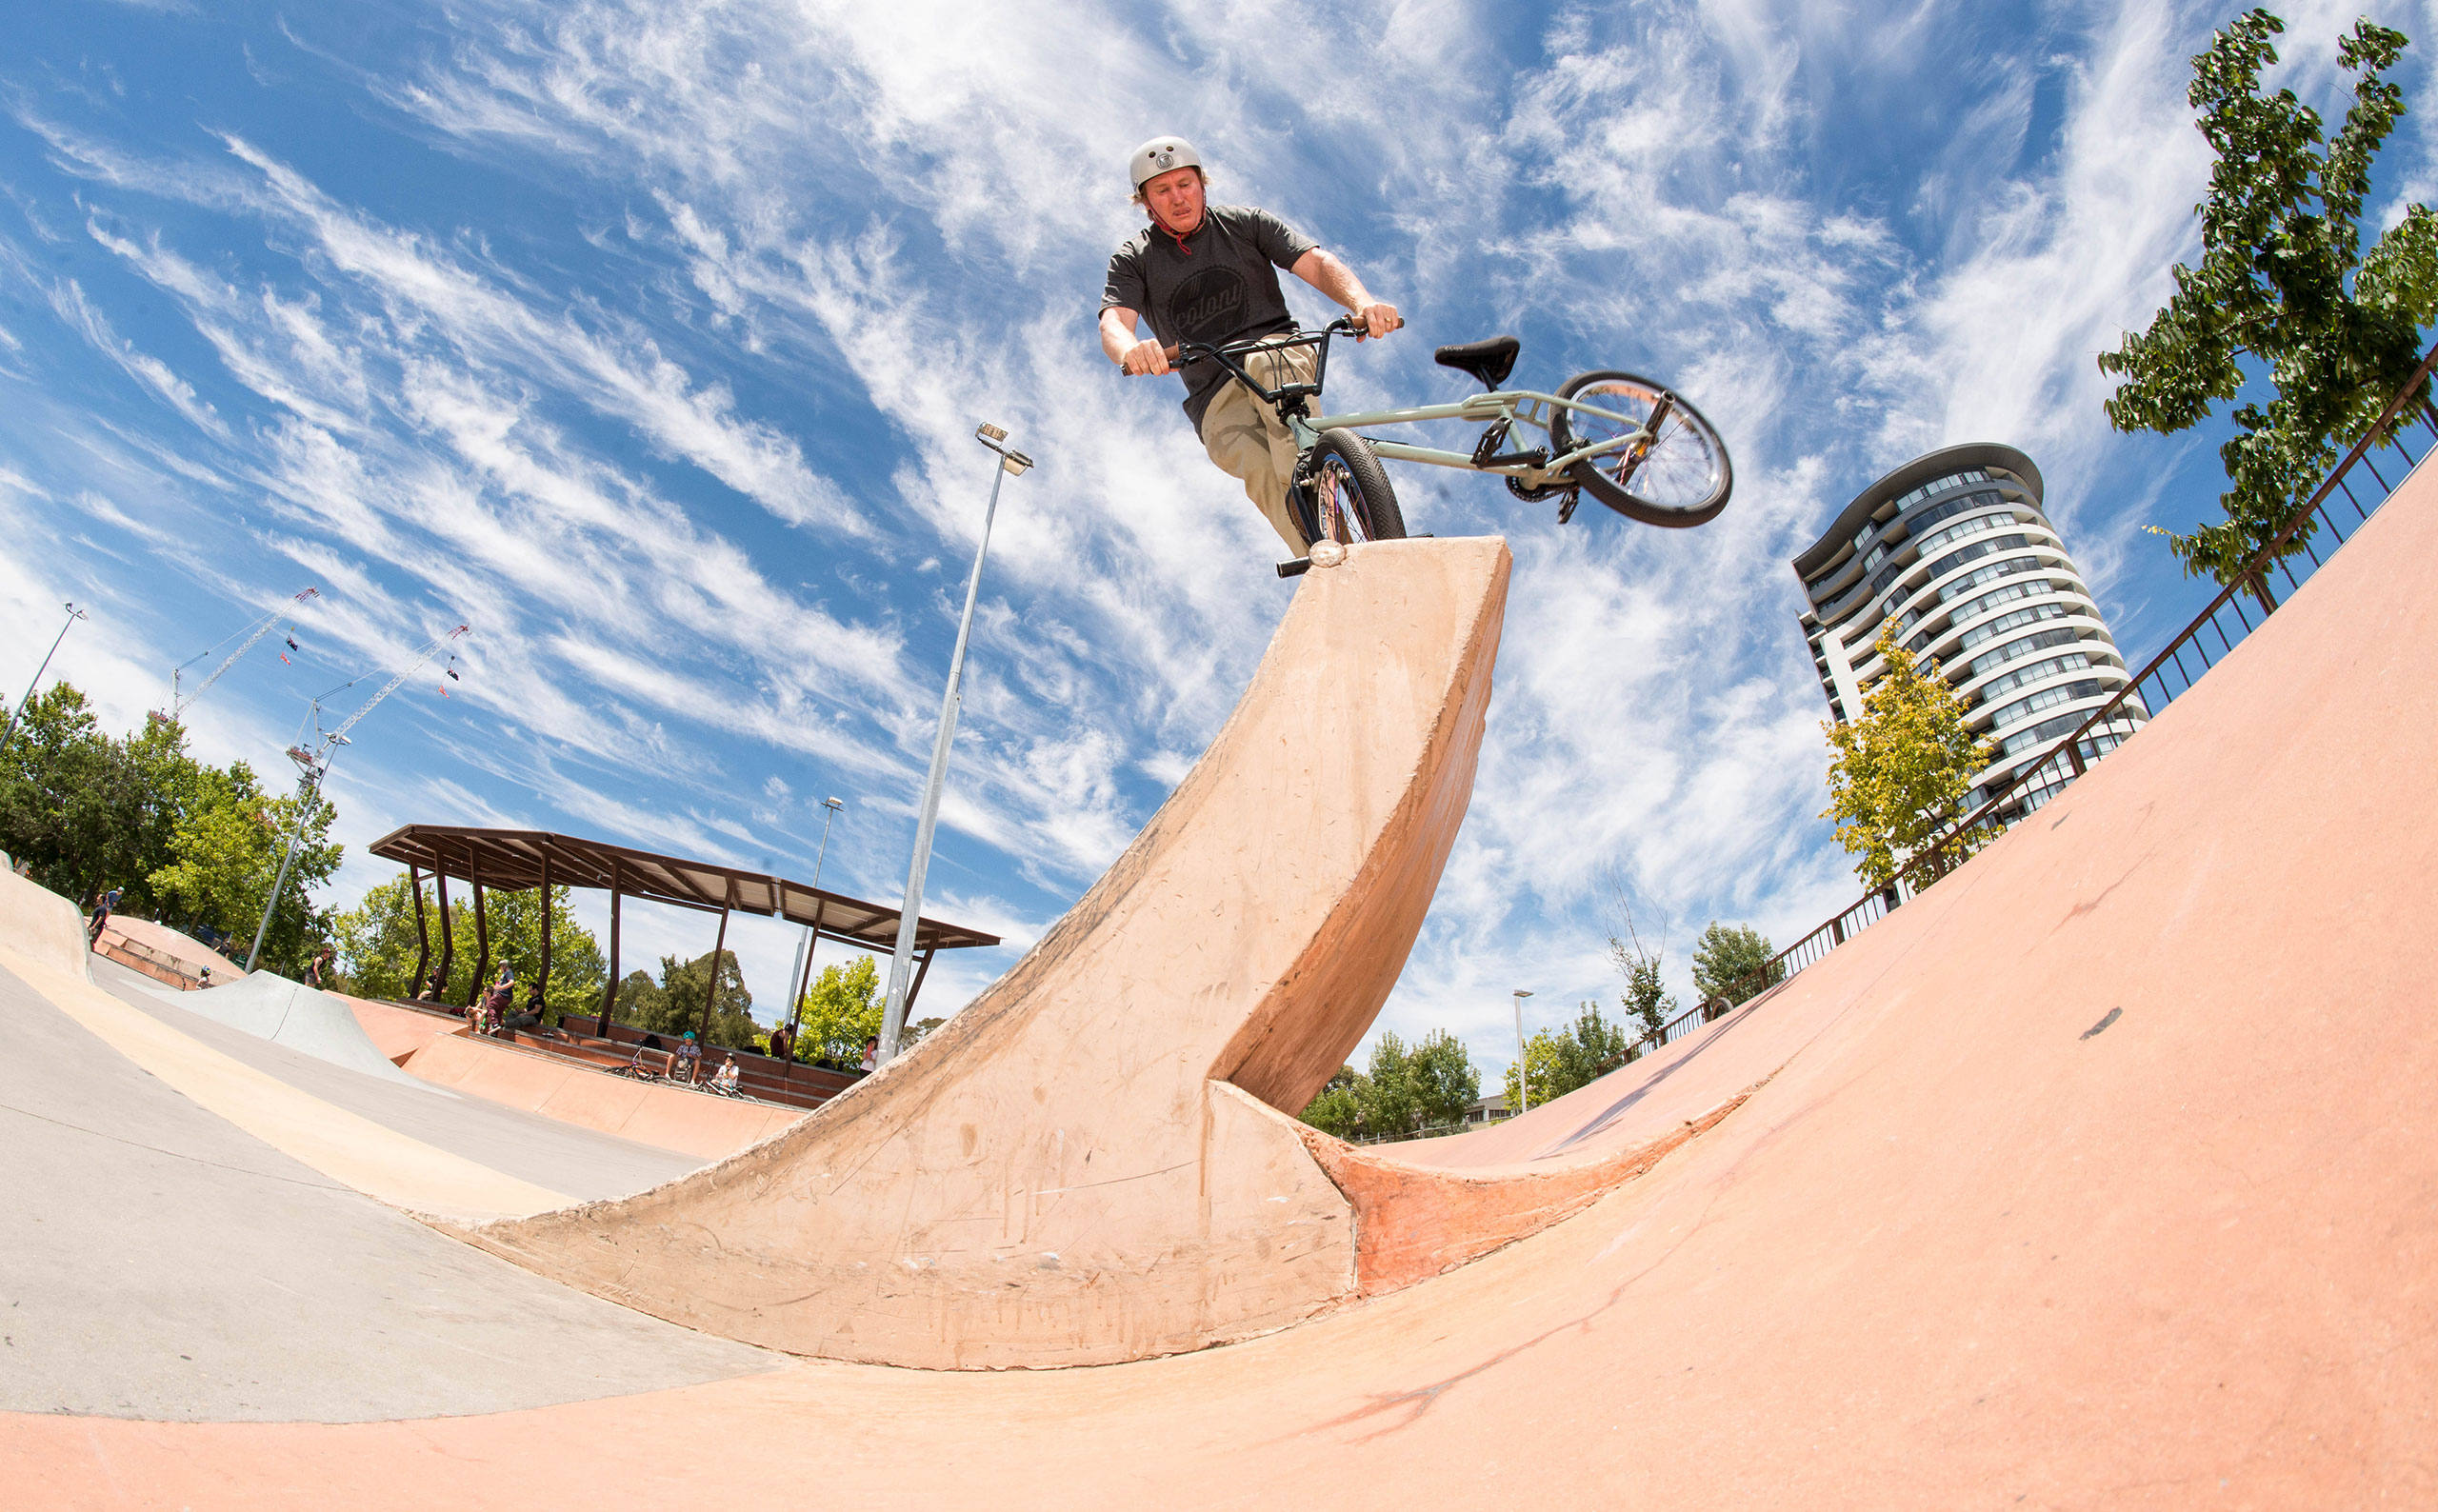 Narrow tranny with little to no deck is no match for Clint Millar's nose pick whip skills.